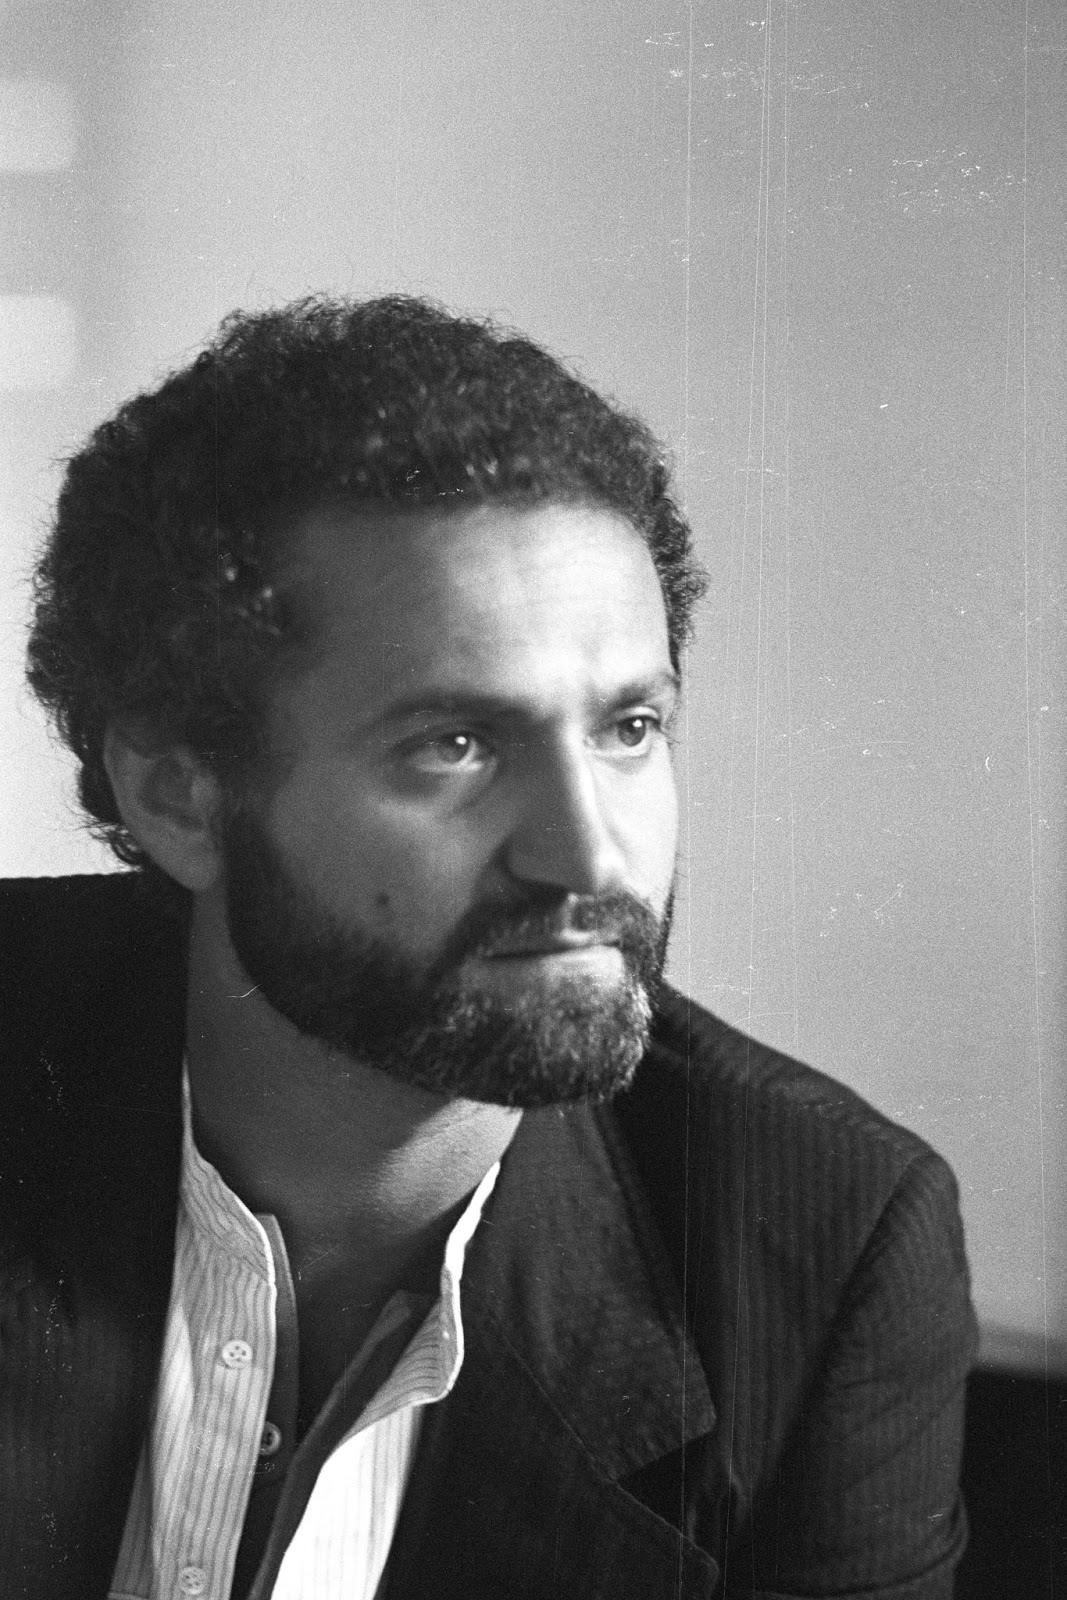 Go with a style : 10 facts you should know about Gianni Versace